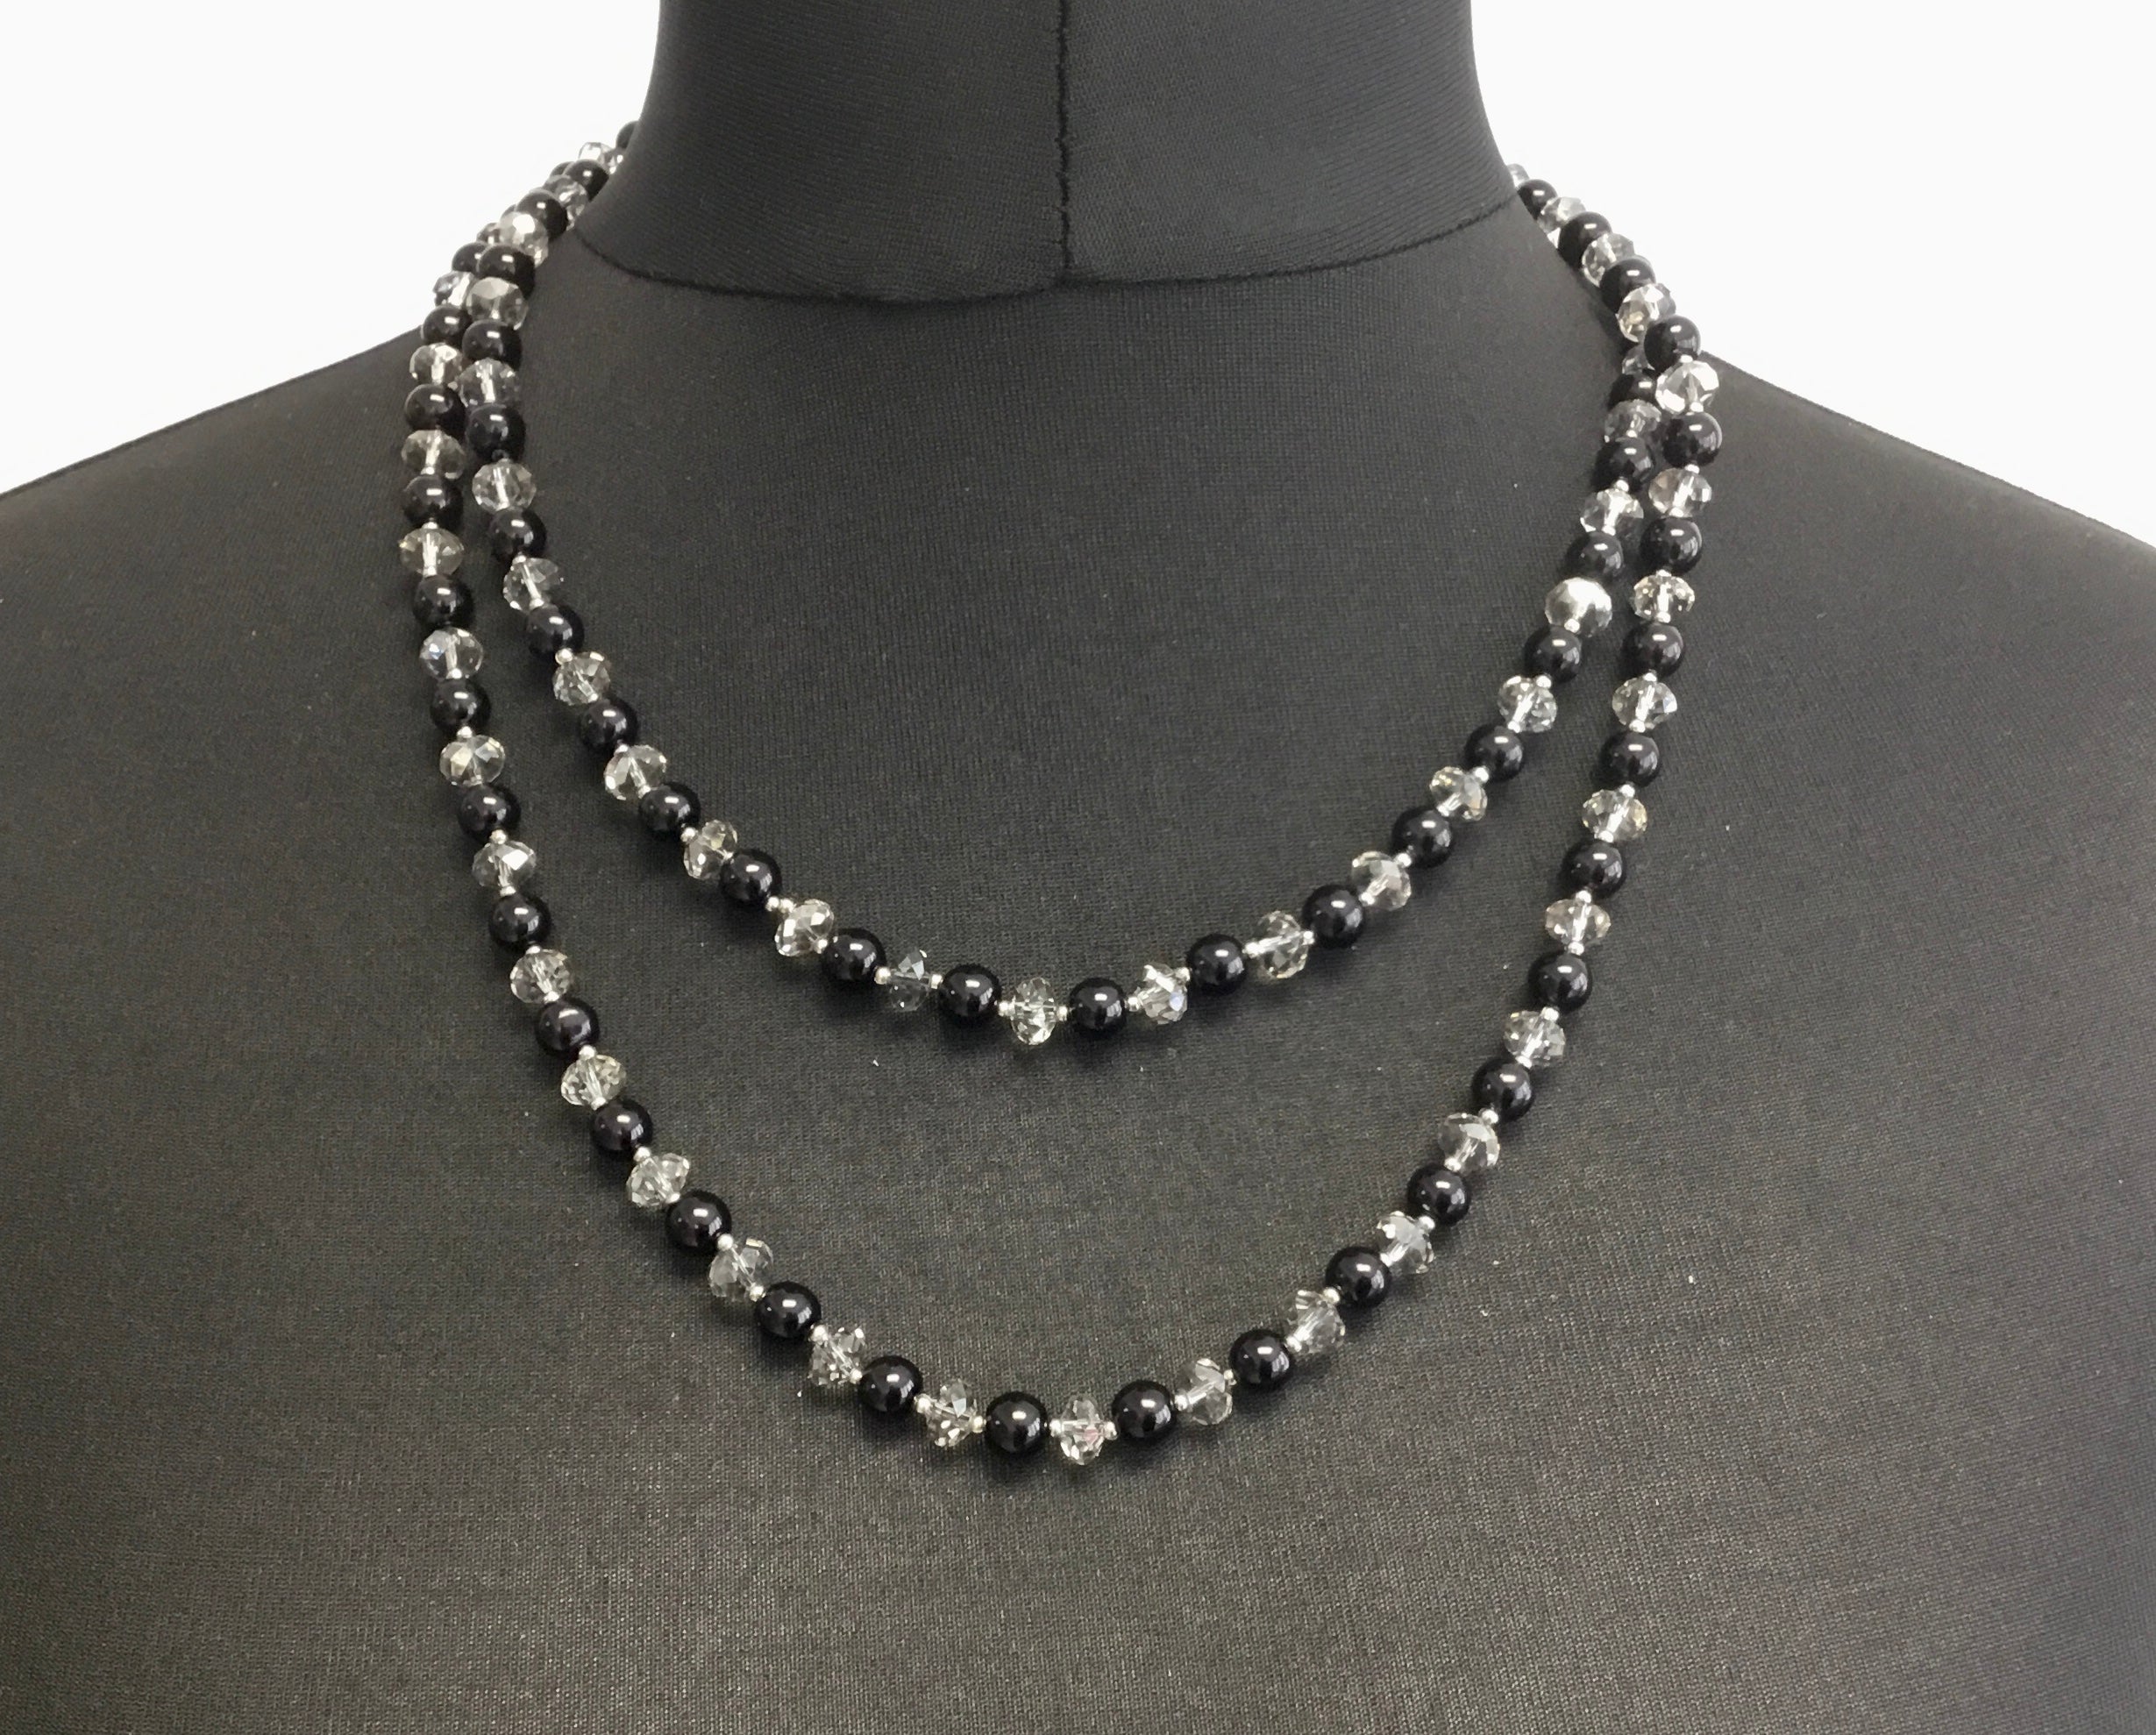 Crystal and Black Bead Necklace.